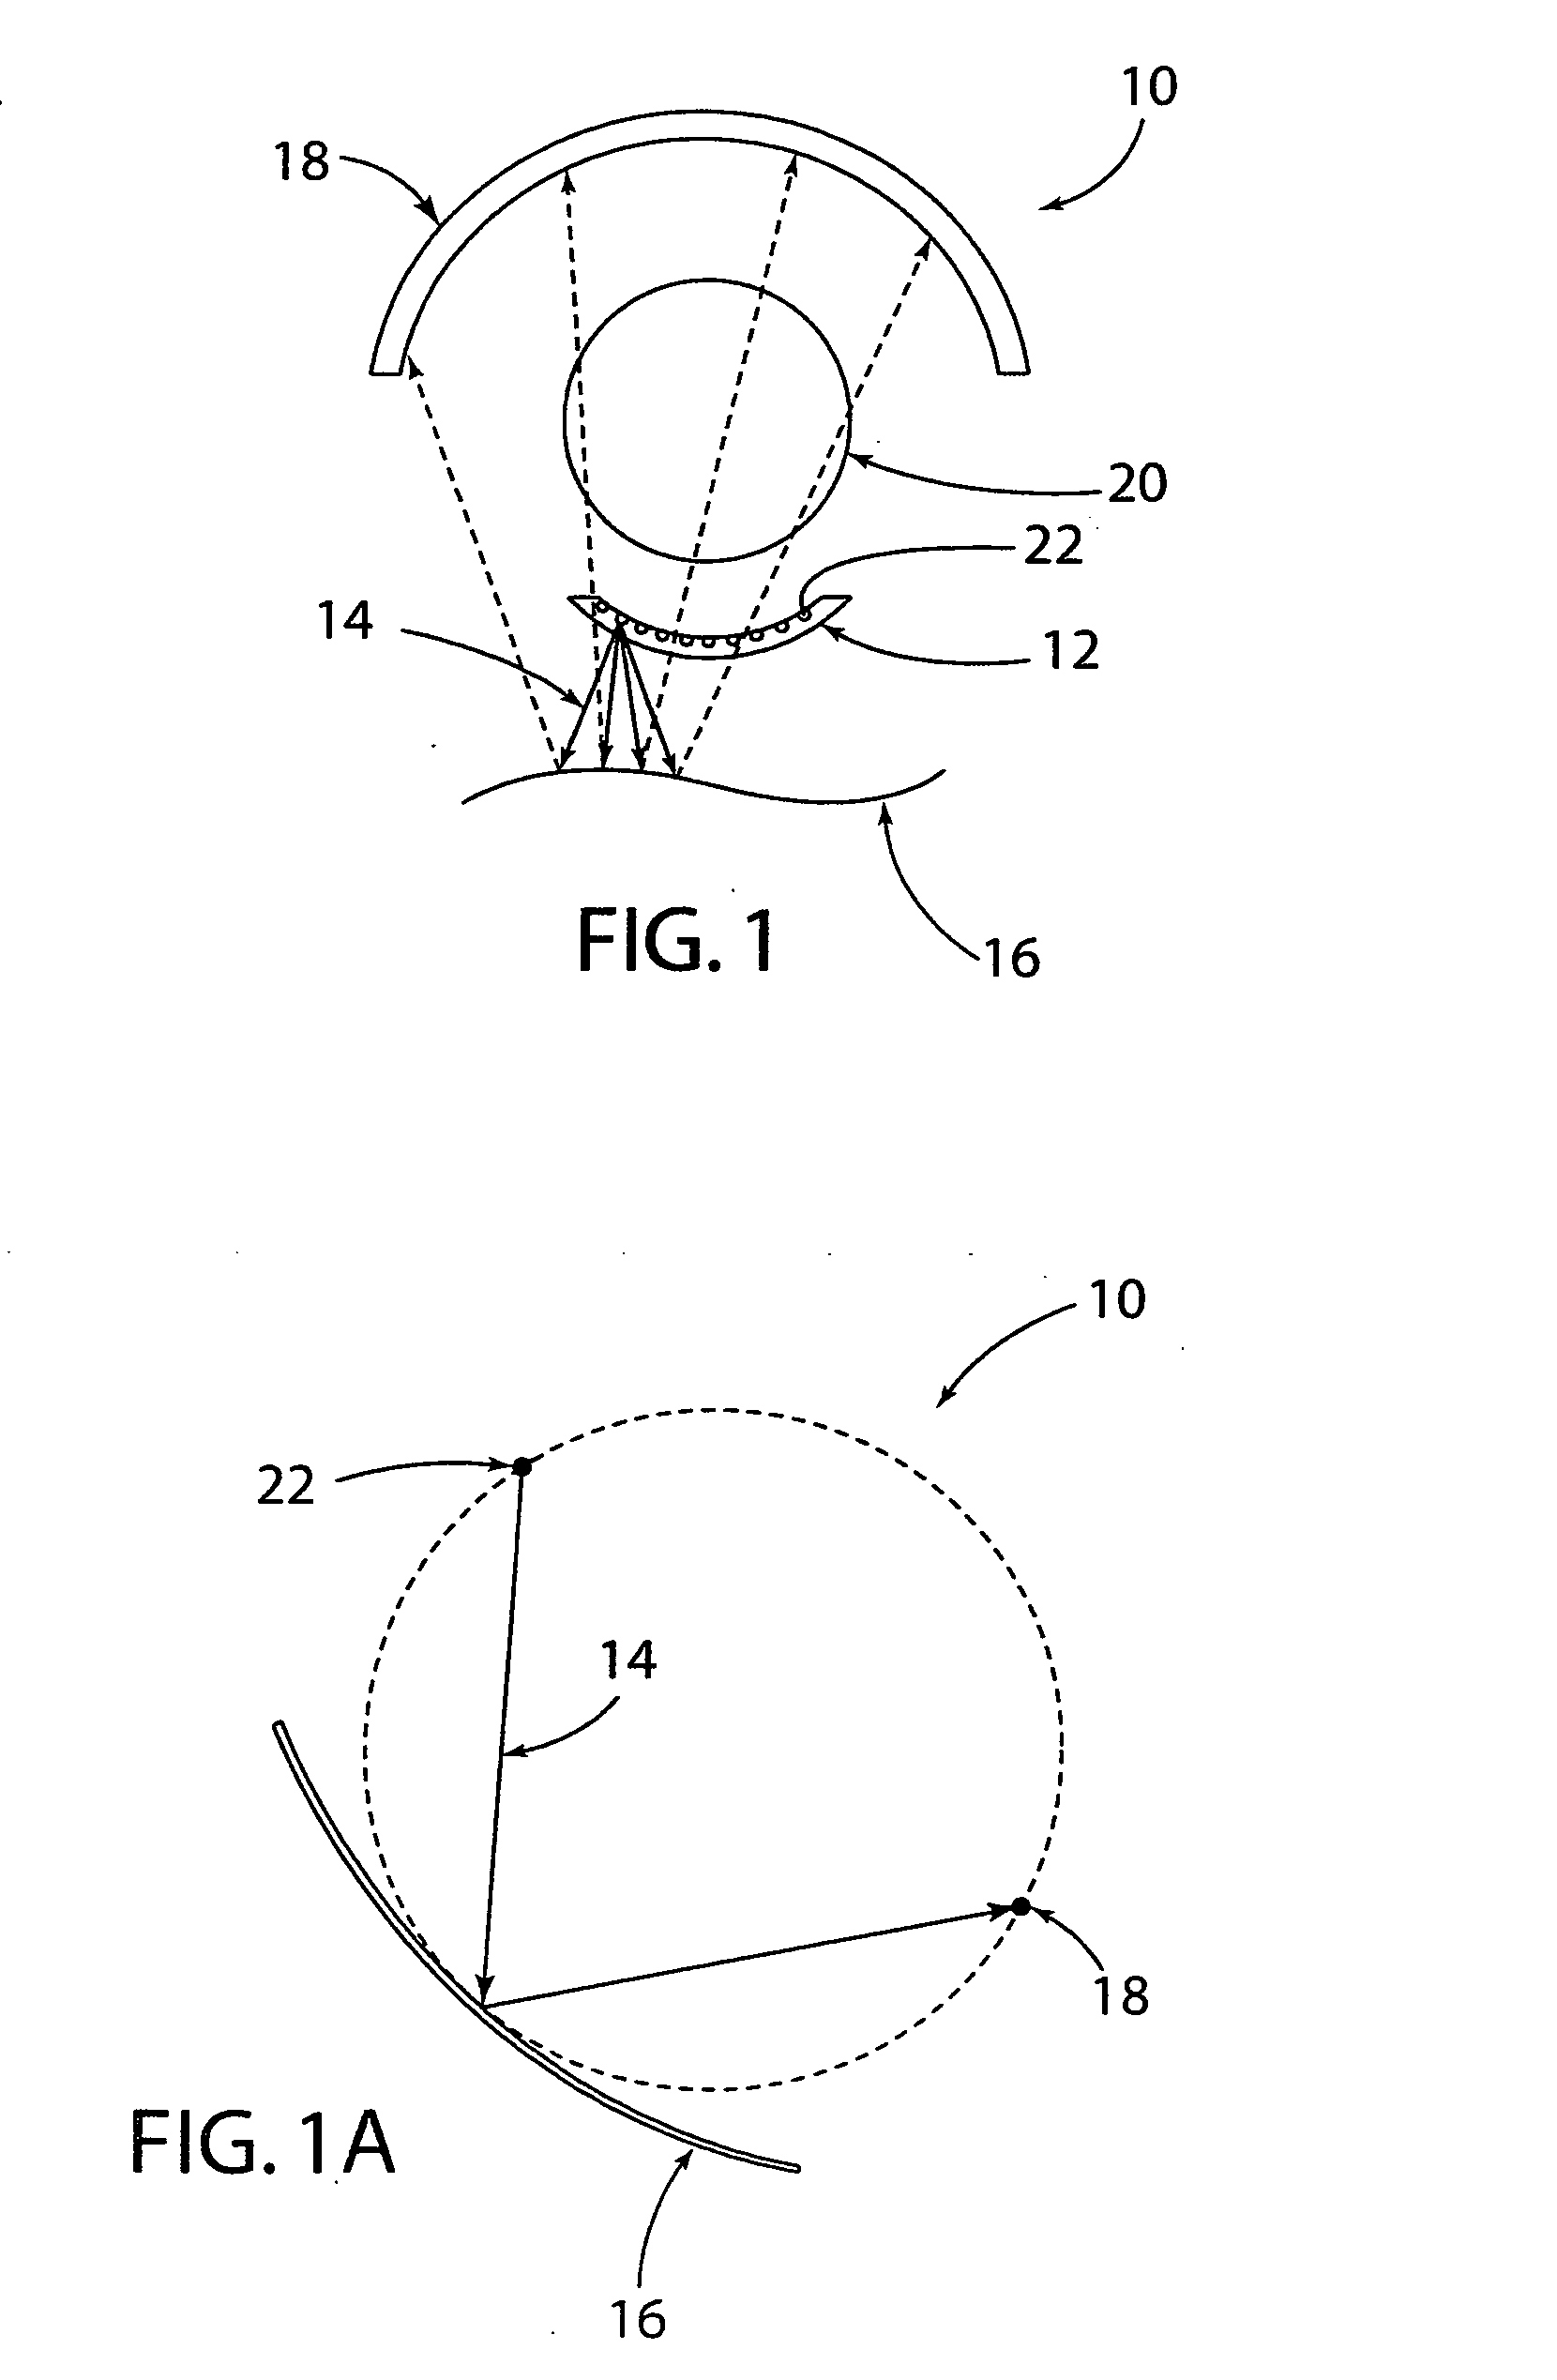 Tomographic imaging system using a conformable mirror